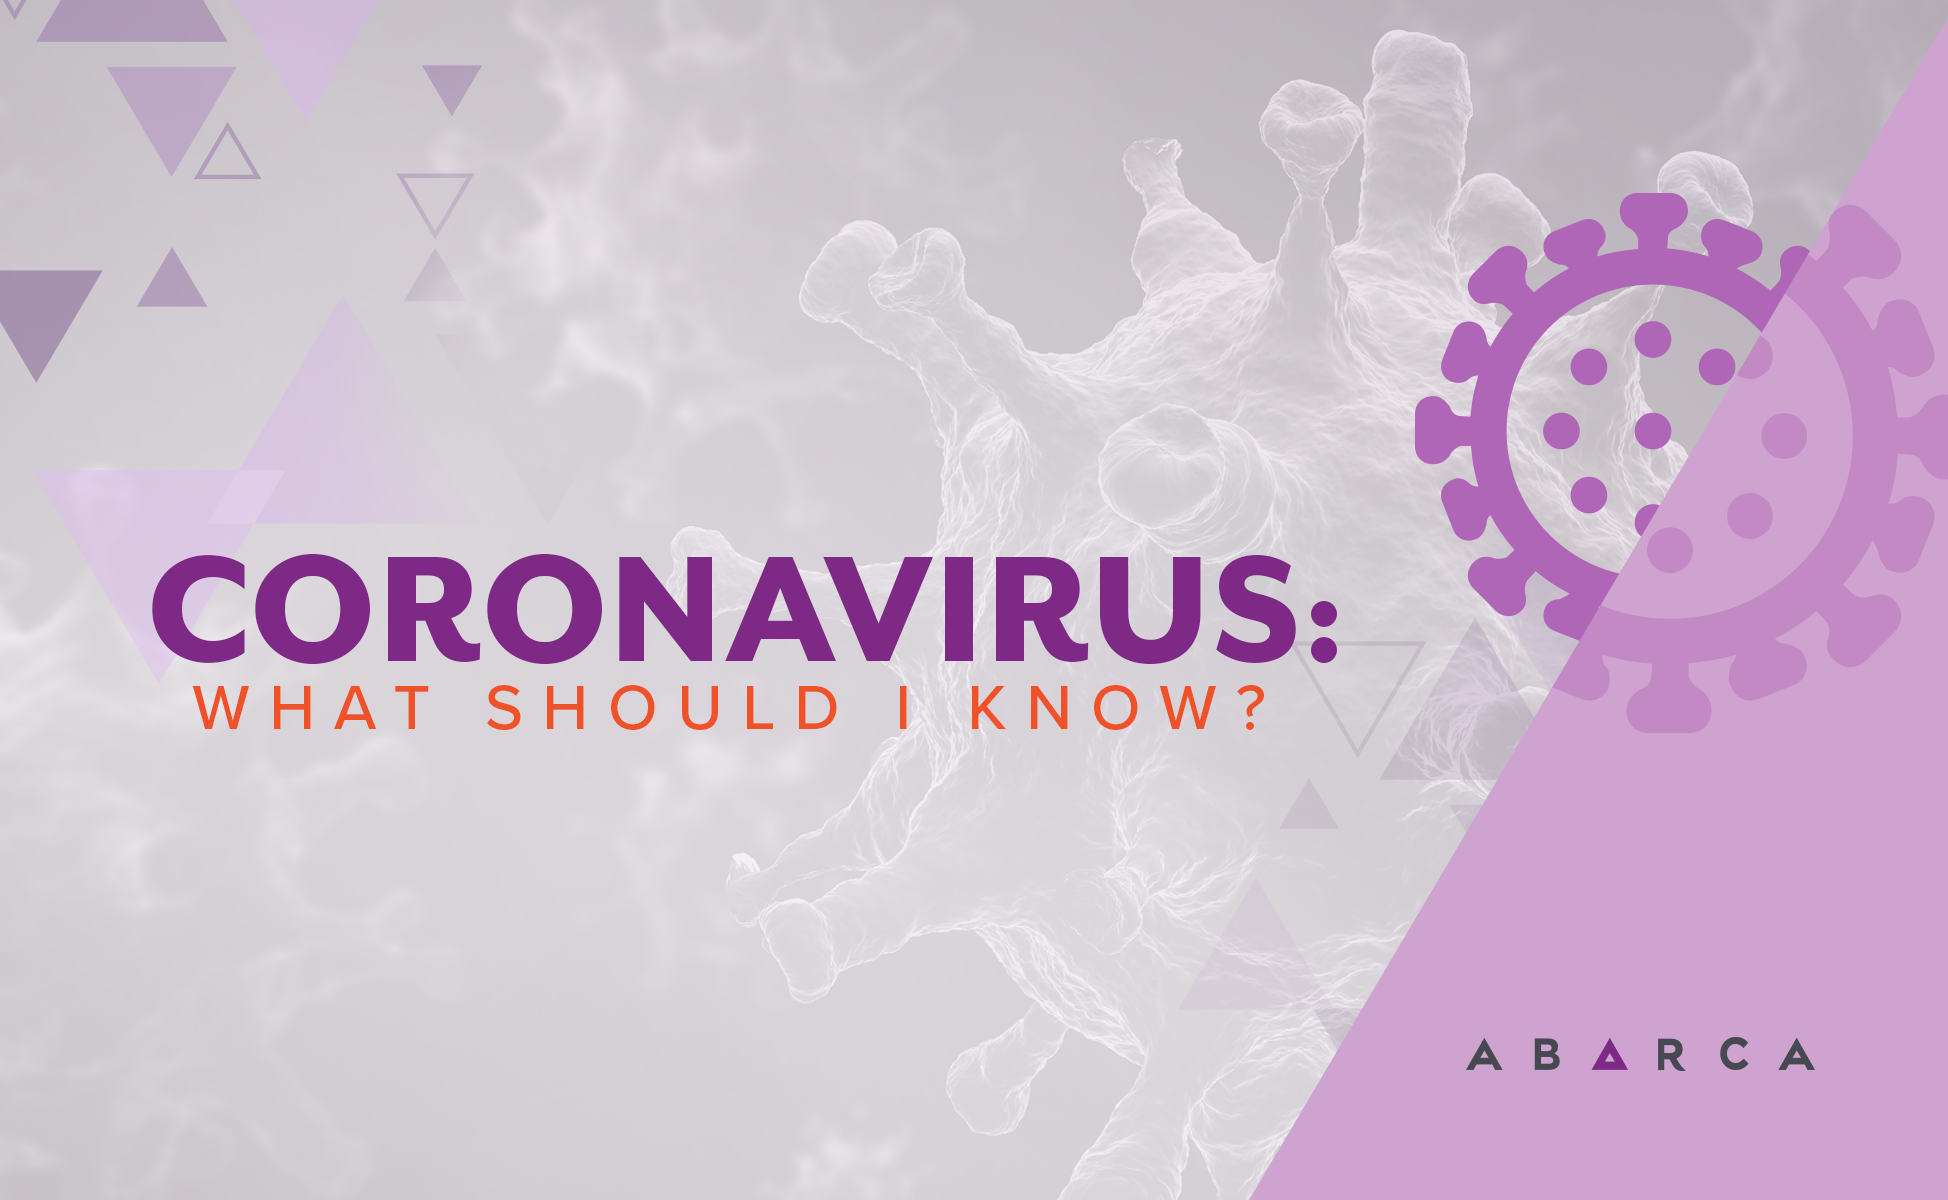 Abarca Health: What should I know about the Coronavirus?